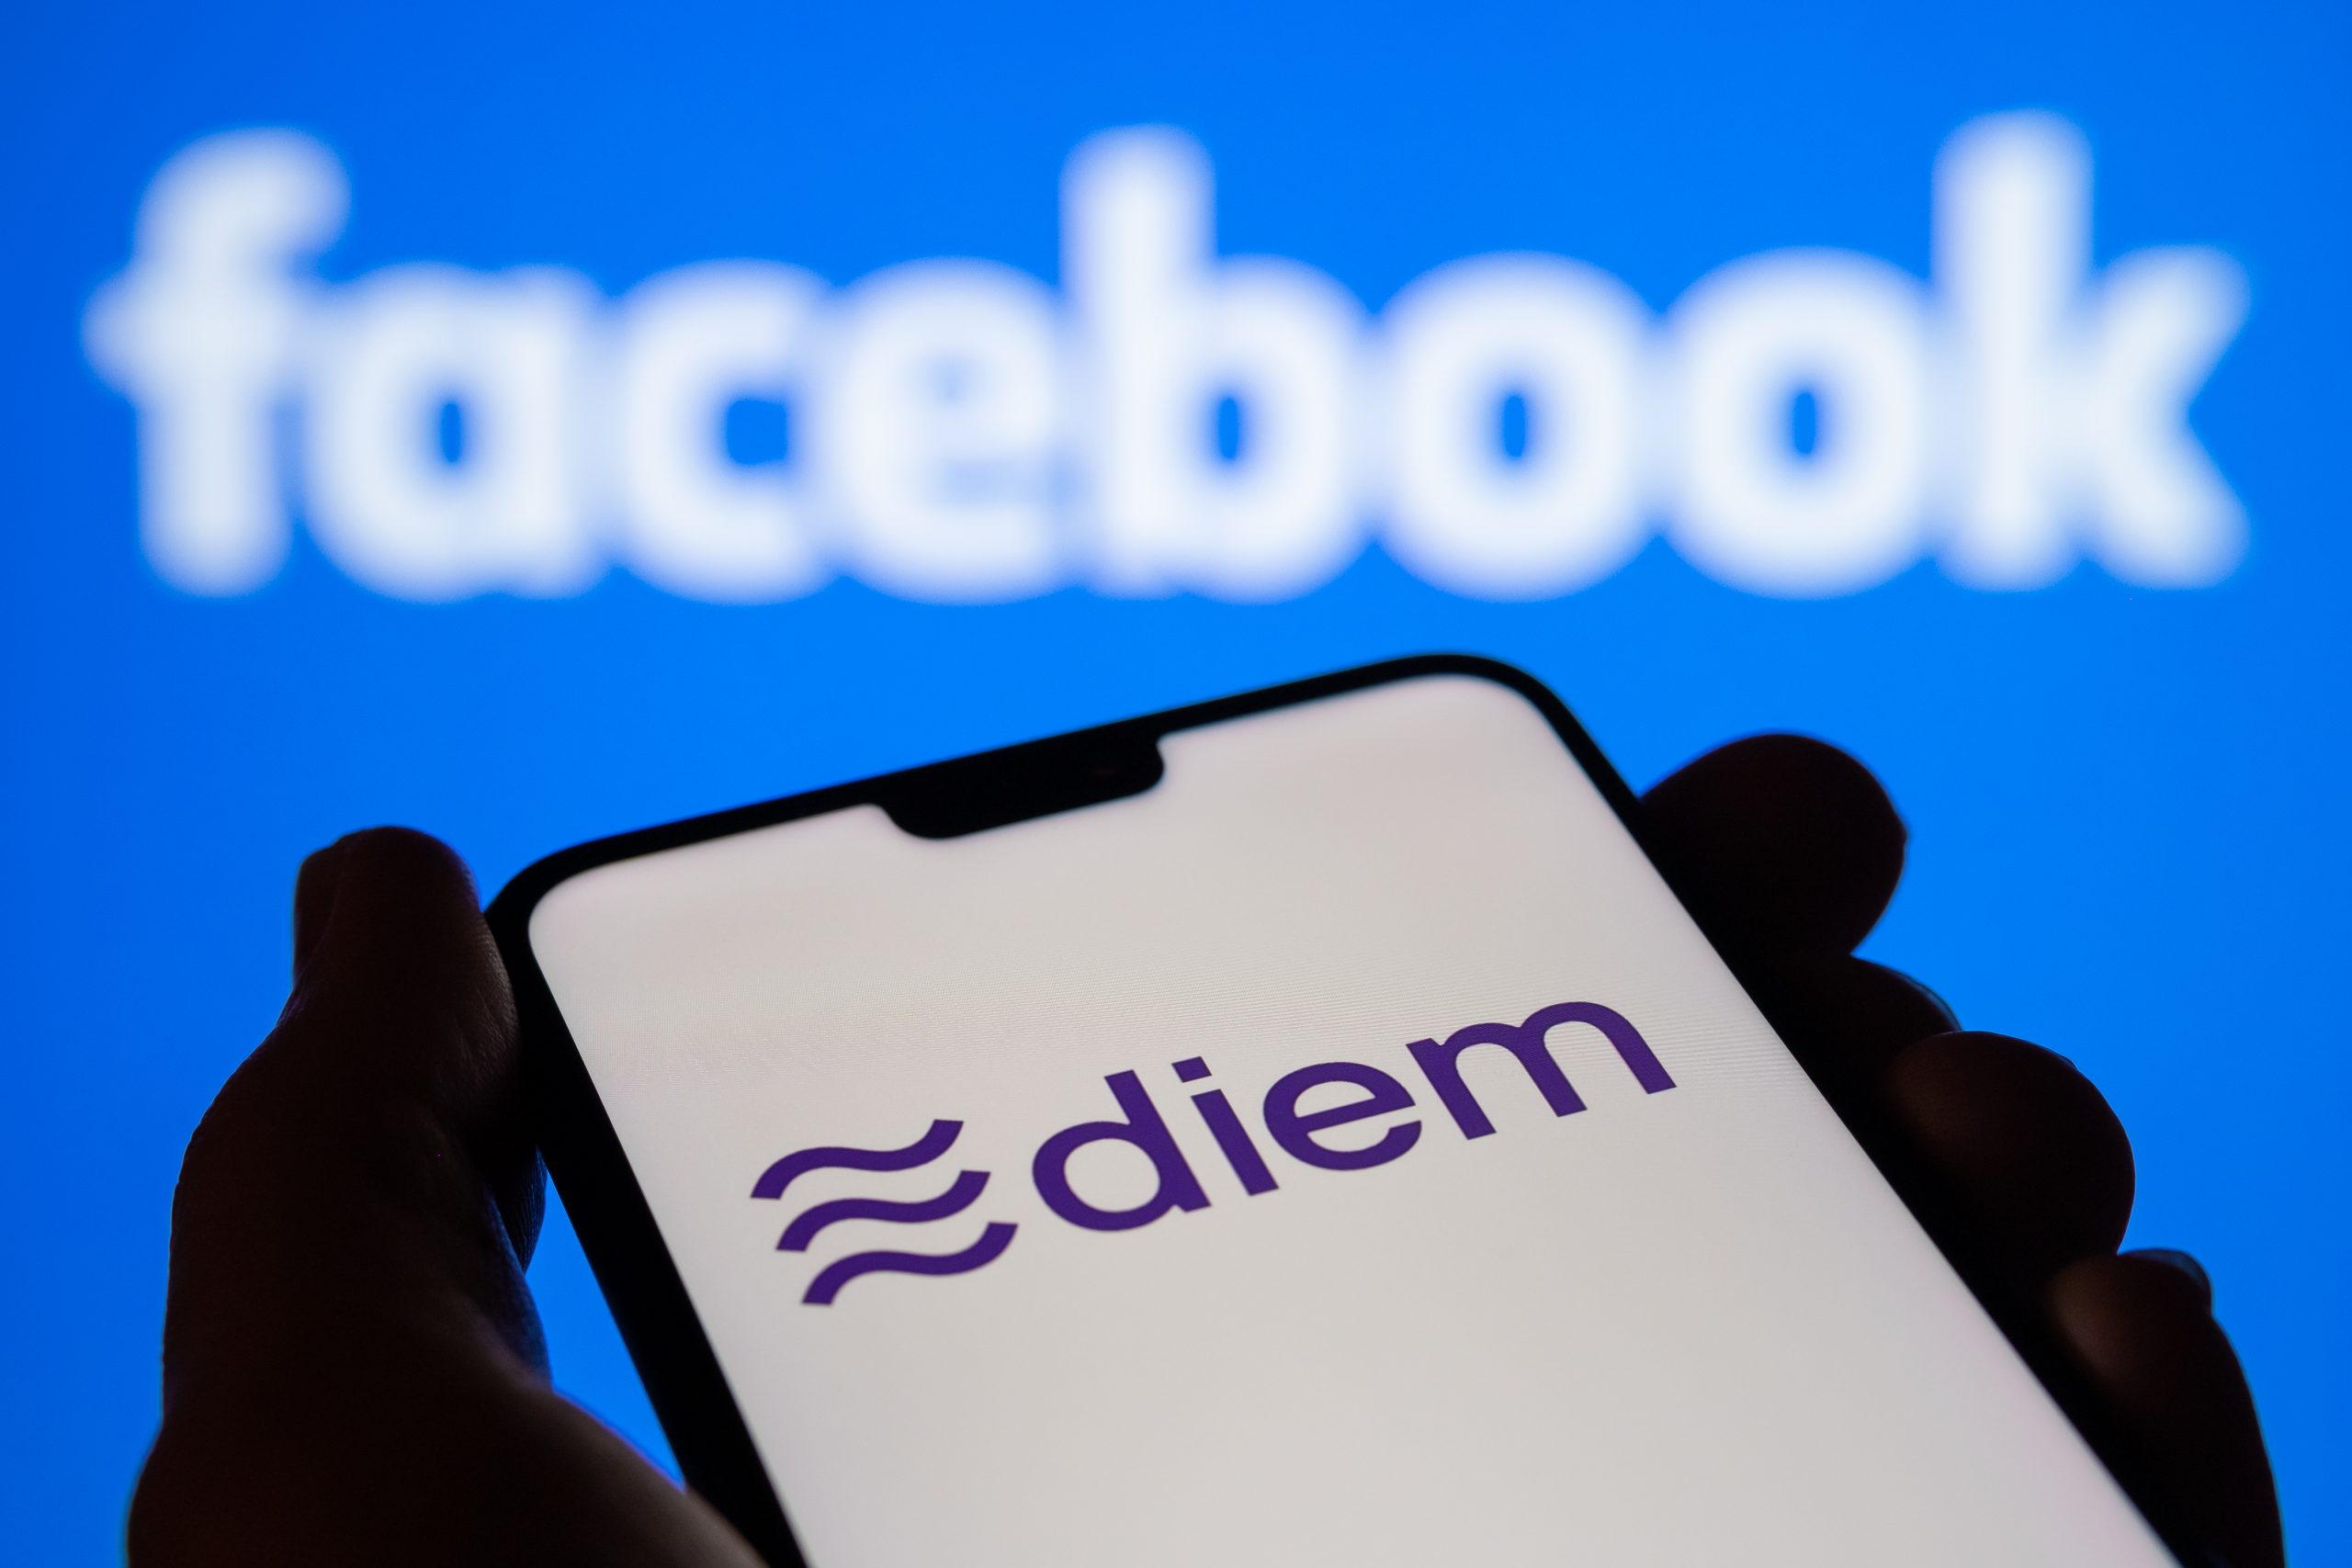 Is Facebook’s Diem the future of cryptocurrency or a financial pipe dream?